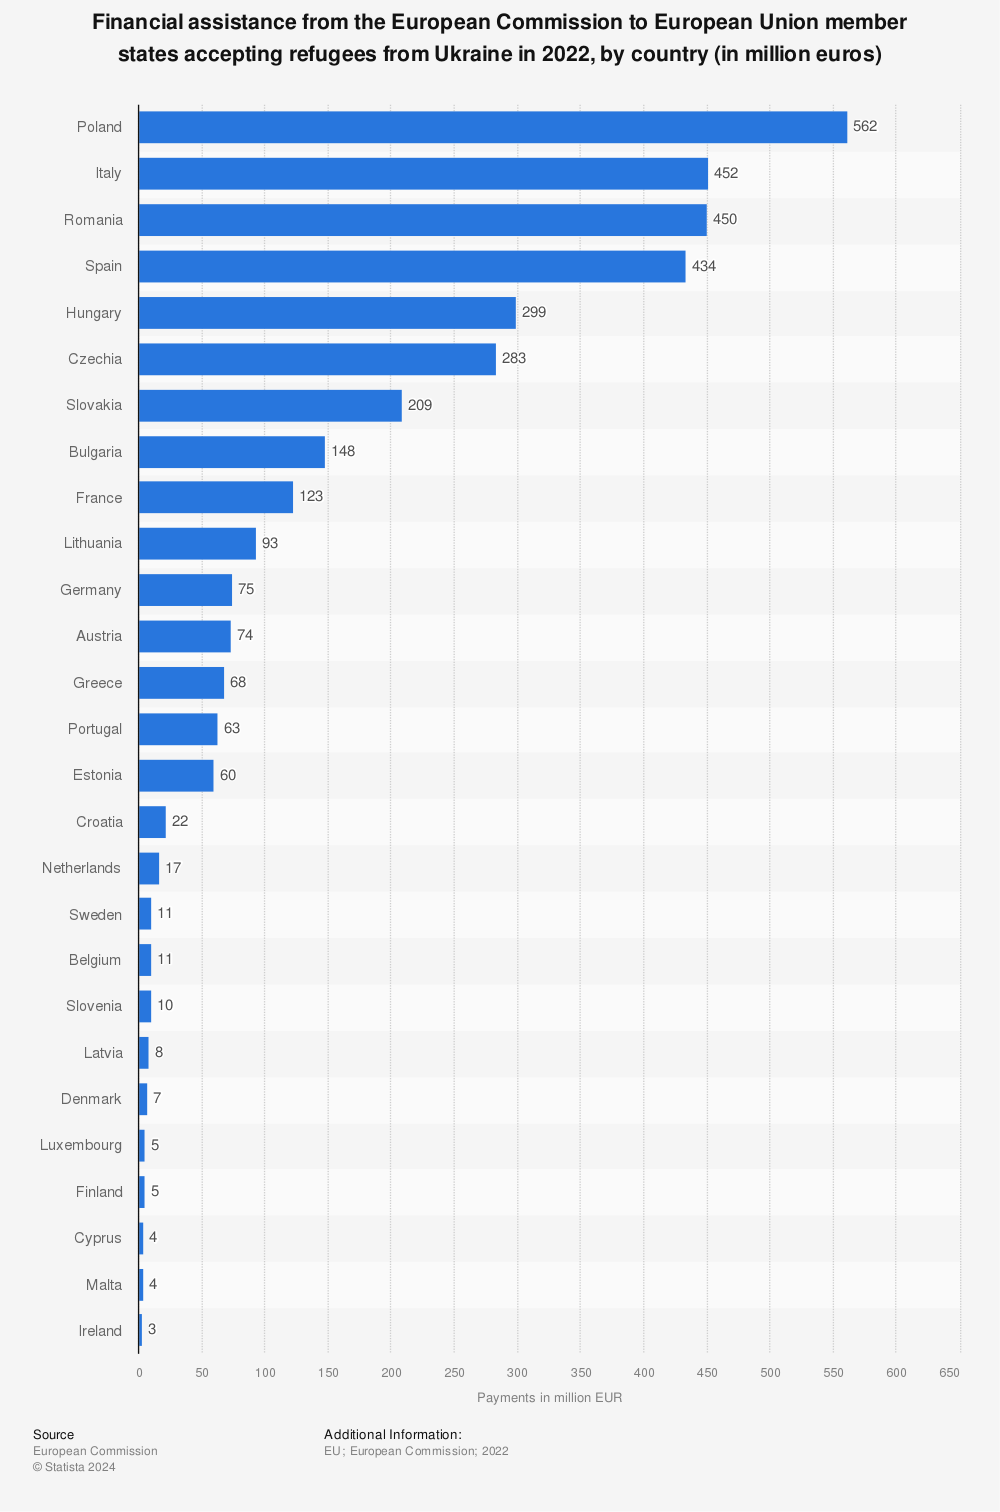 Statistic: Financial assistance from the European Commission to European Union member states accepting refugees from Ukraine in 2022, by country (in million euros) | Statista